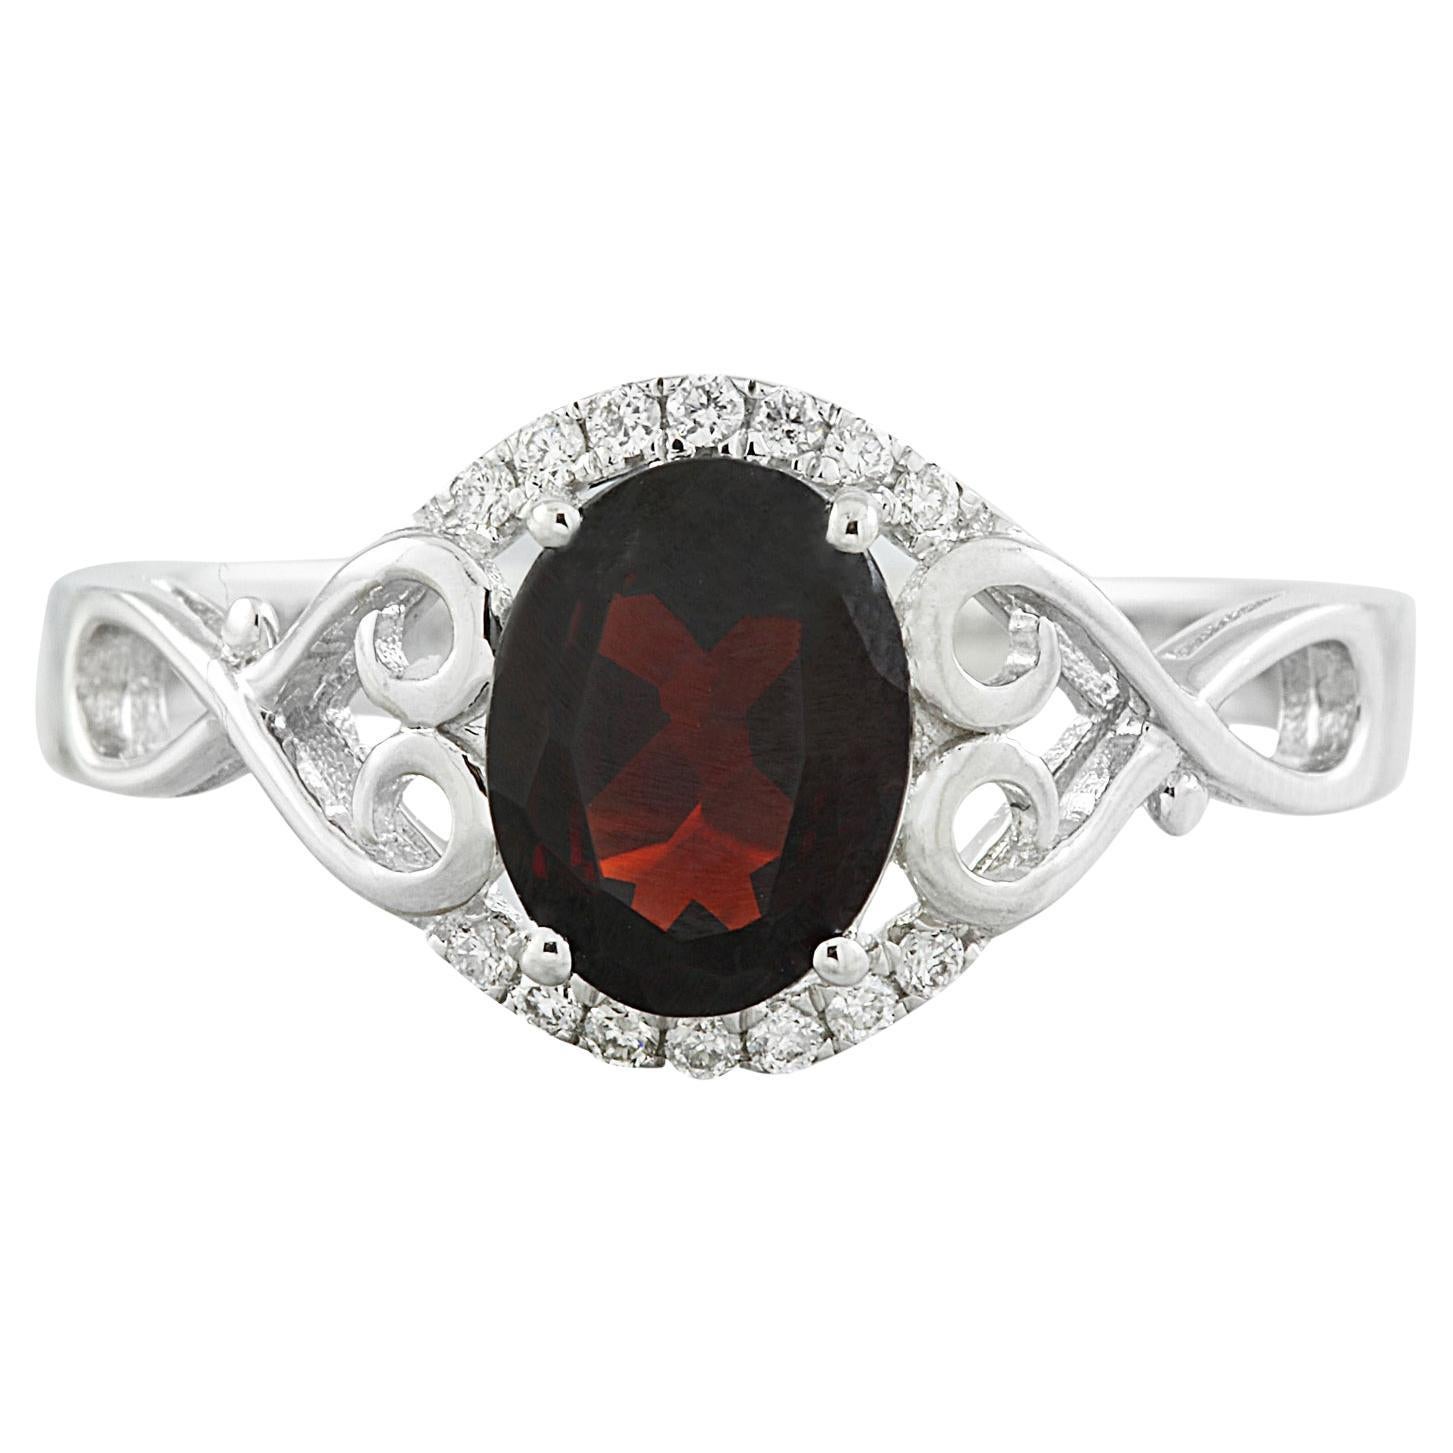 Exquisite Natural Garnet Diamond Ring in 14K Solid White Gold